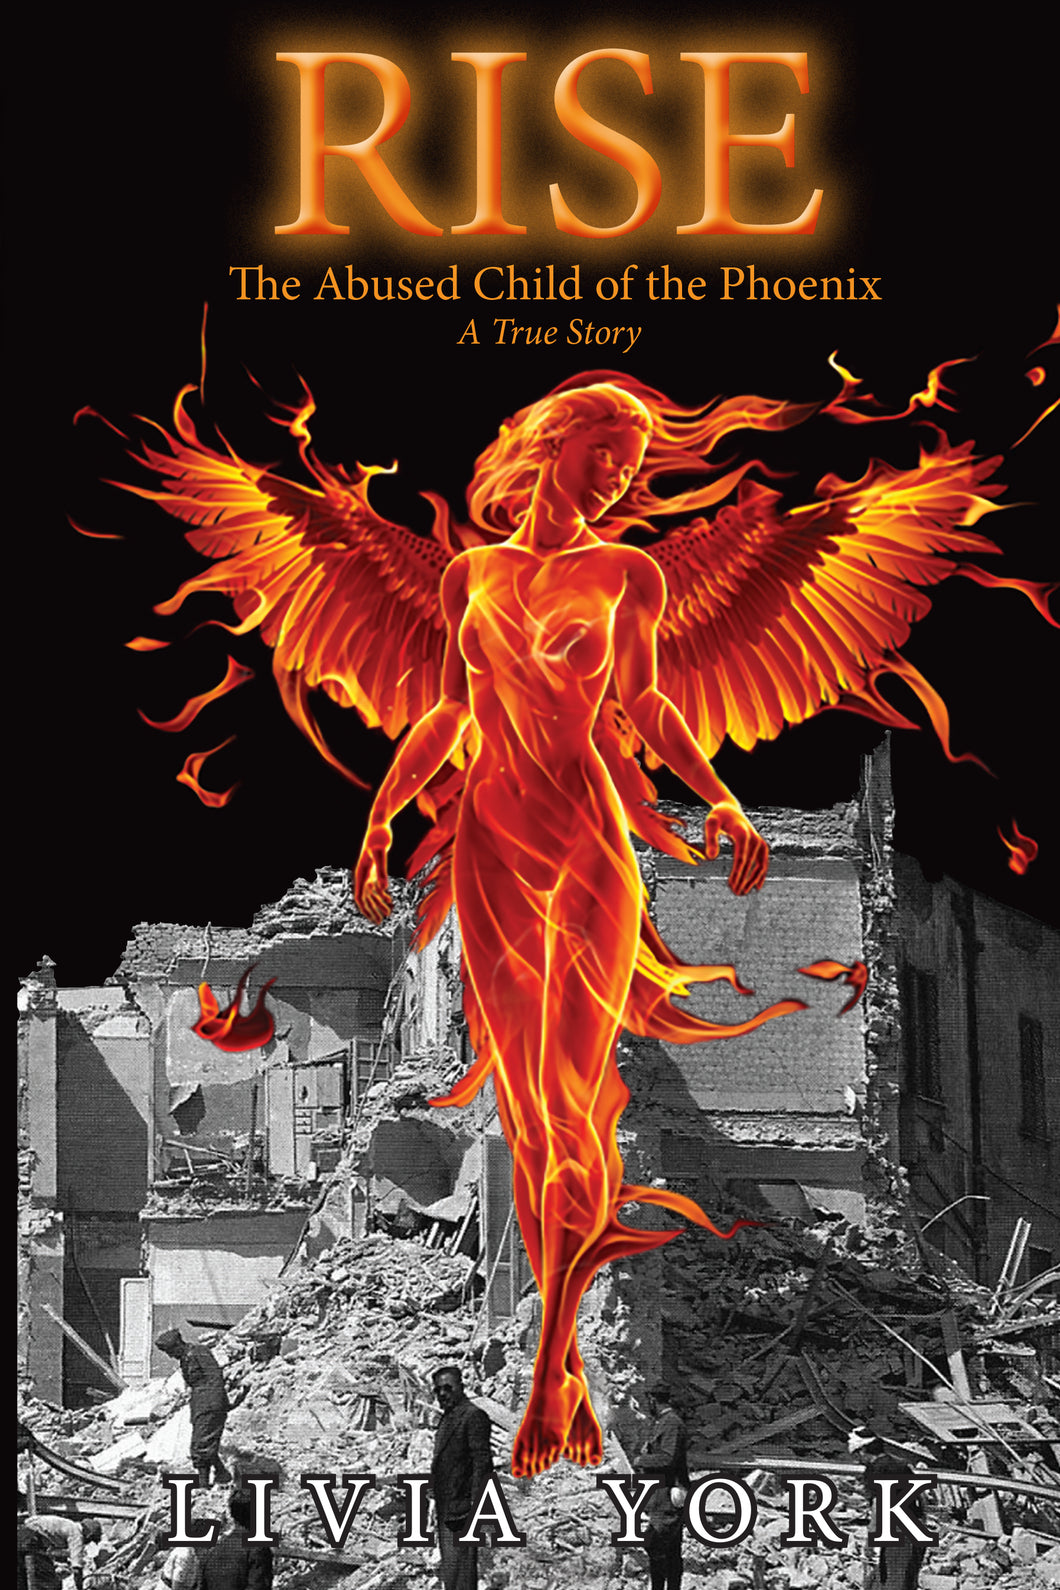 RISE: The Abused Child of the Phoenix